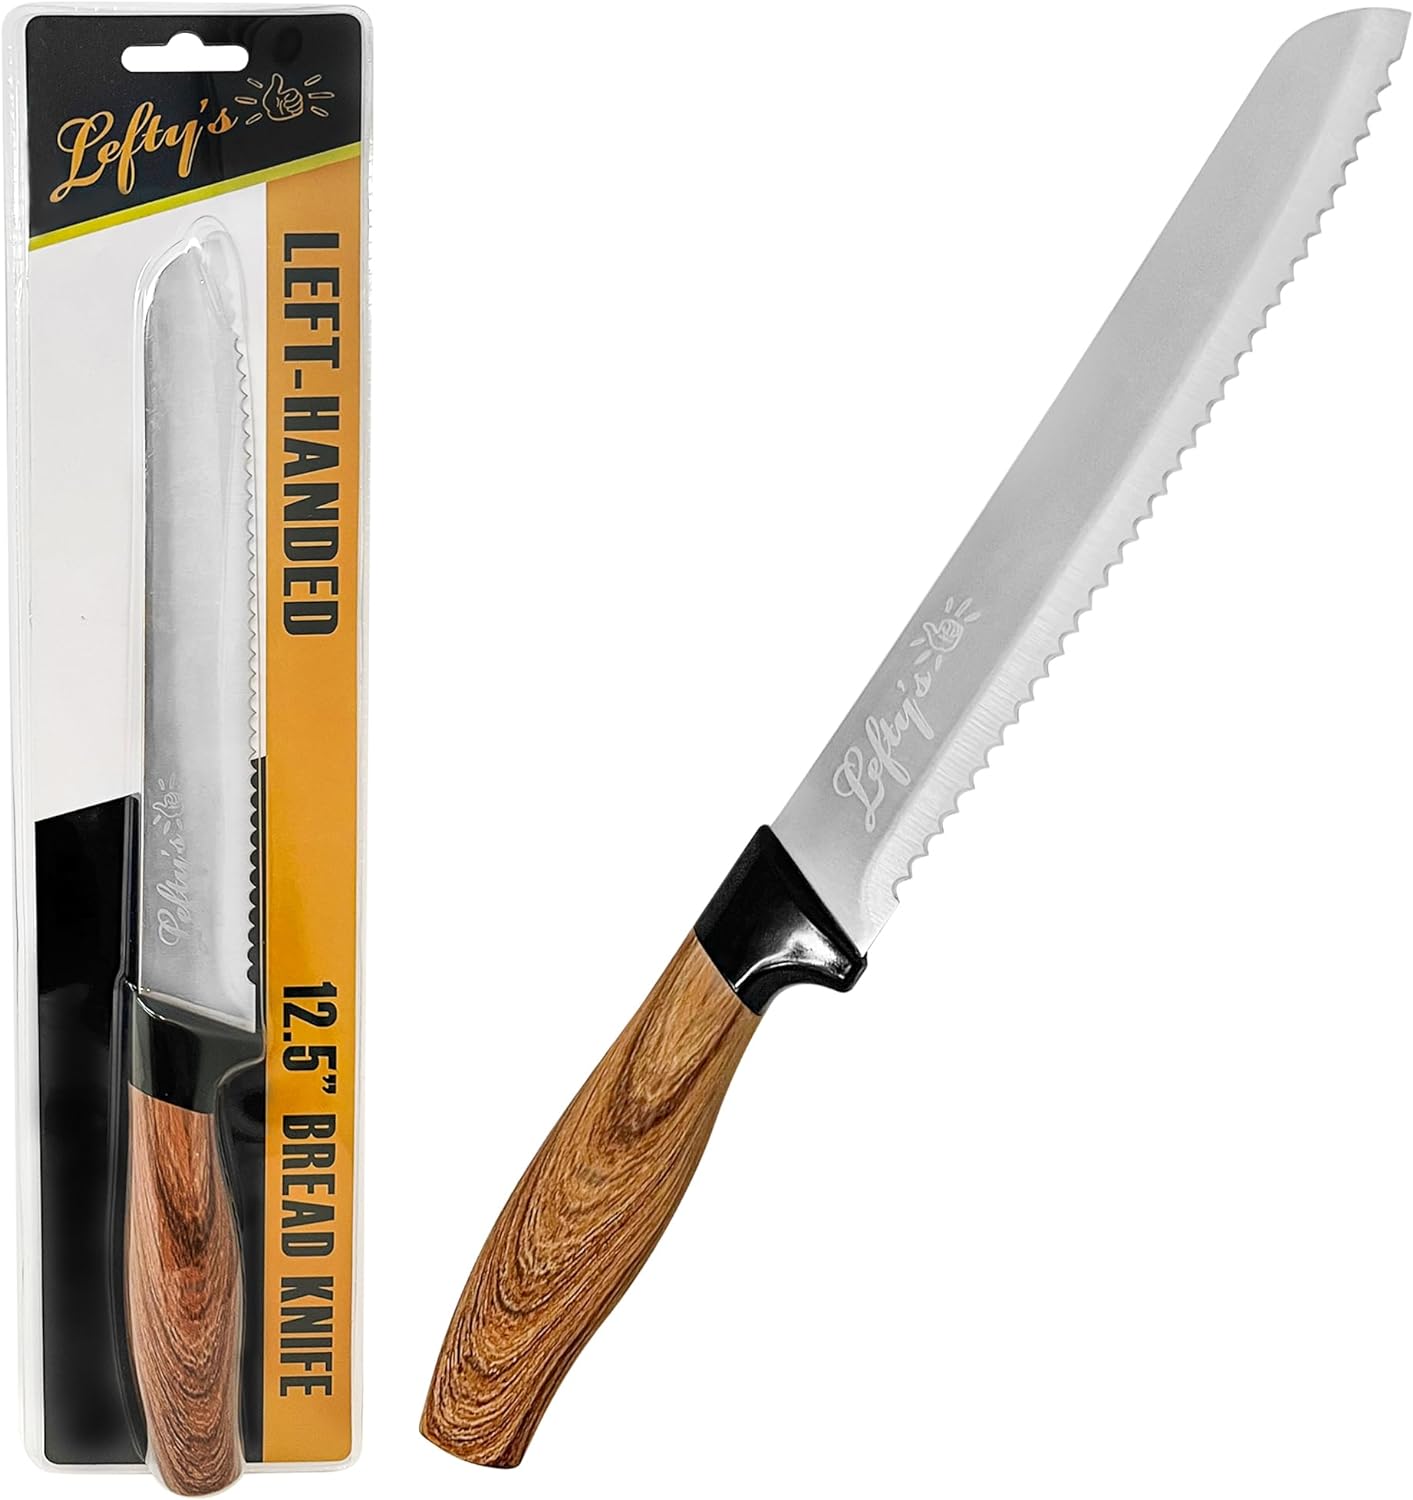 Lefty’s Left Handed Bread Knife Review